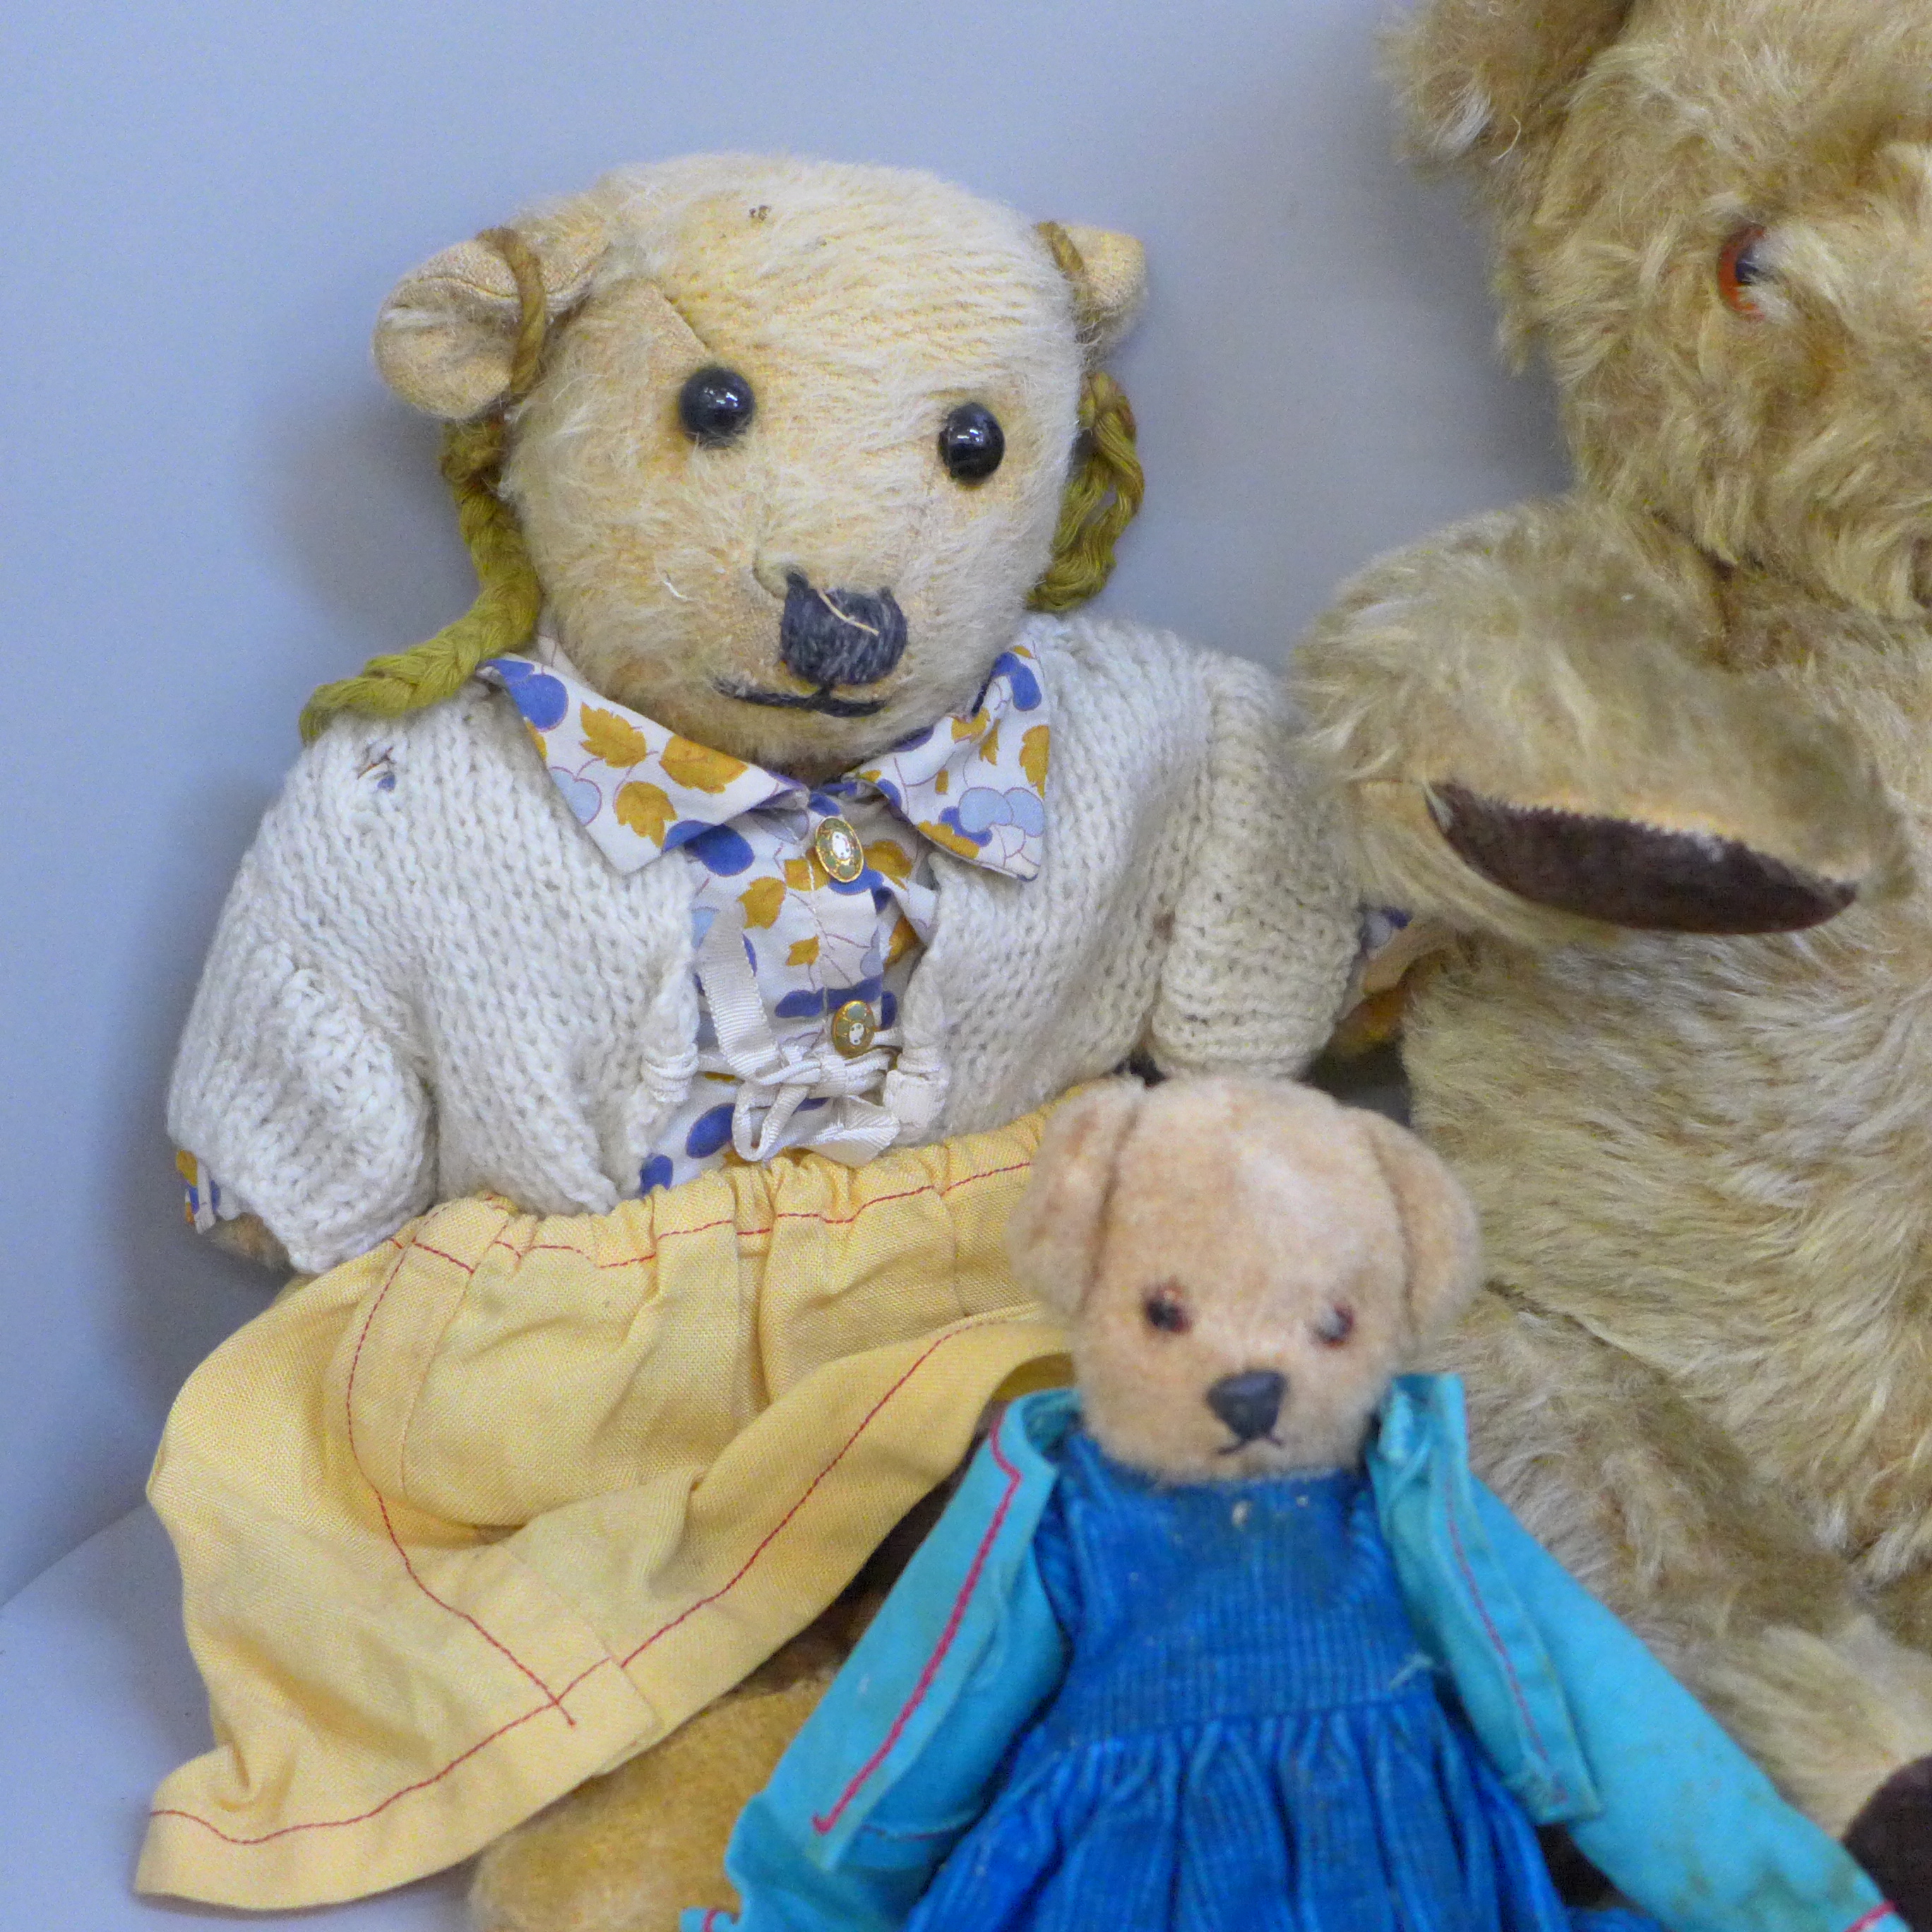 Seven vintage Teddy bears including one musical - Image 2 of 5